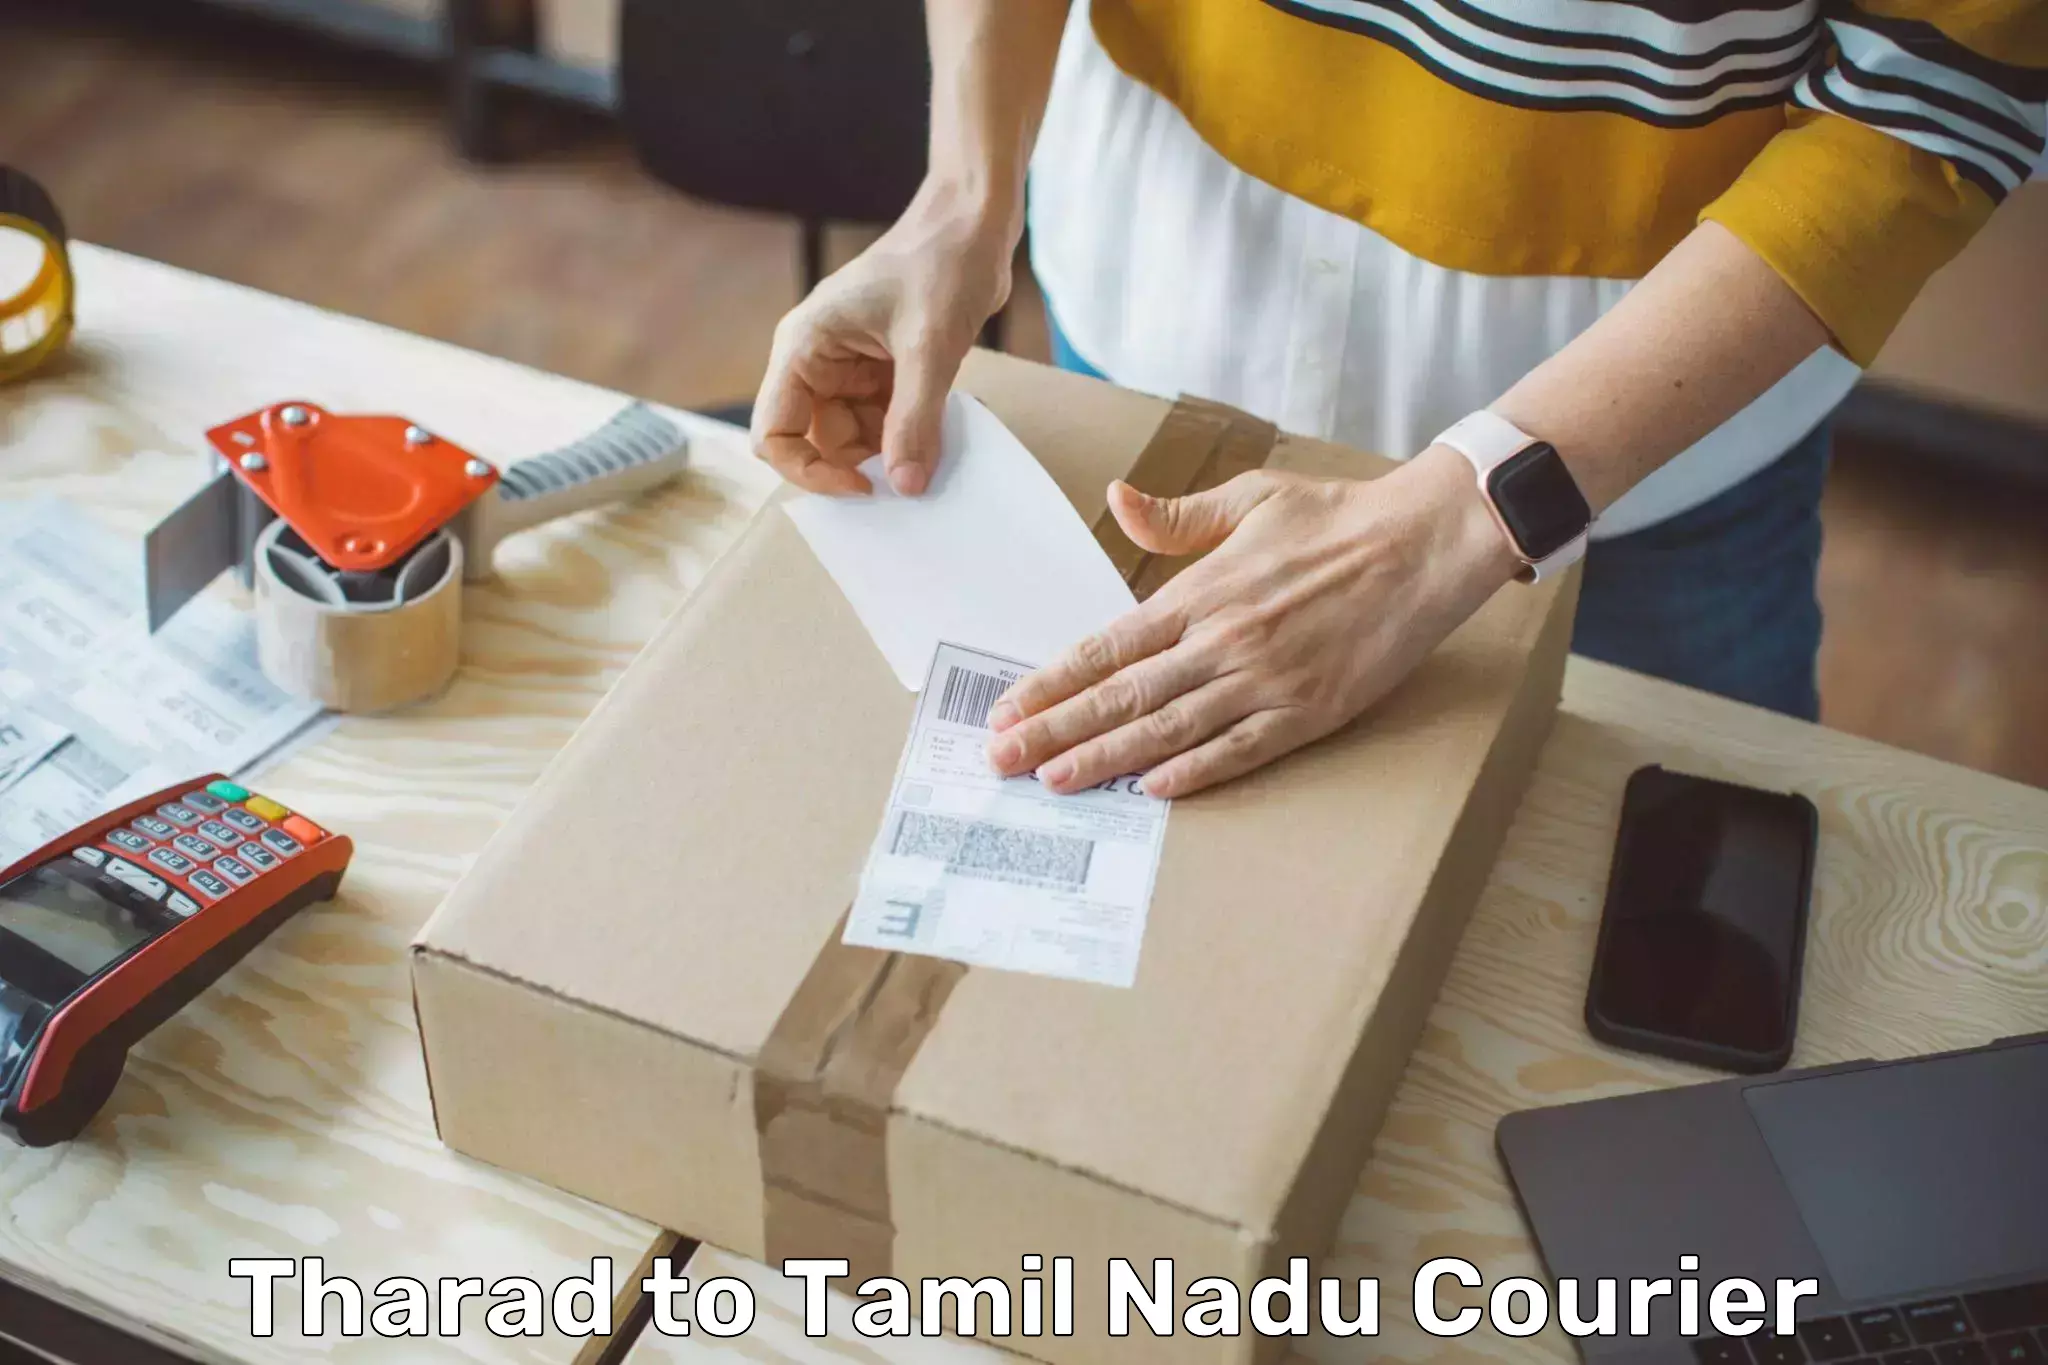 State-of-the-art courier technology in Tharad to Thiruvadanai